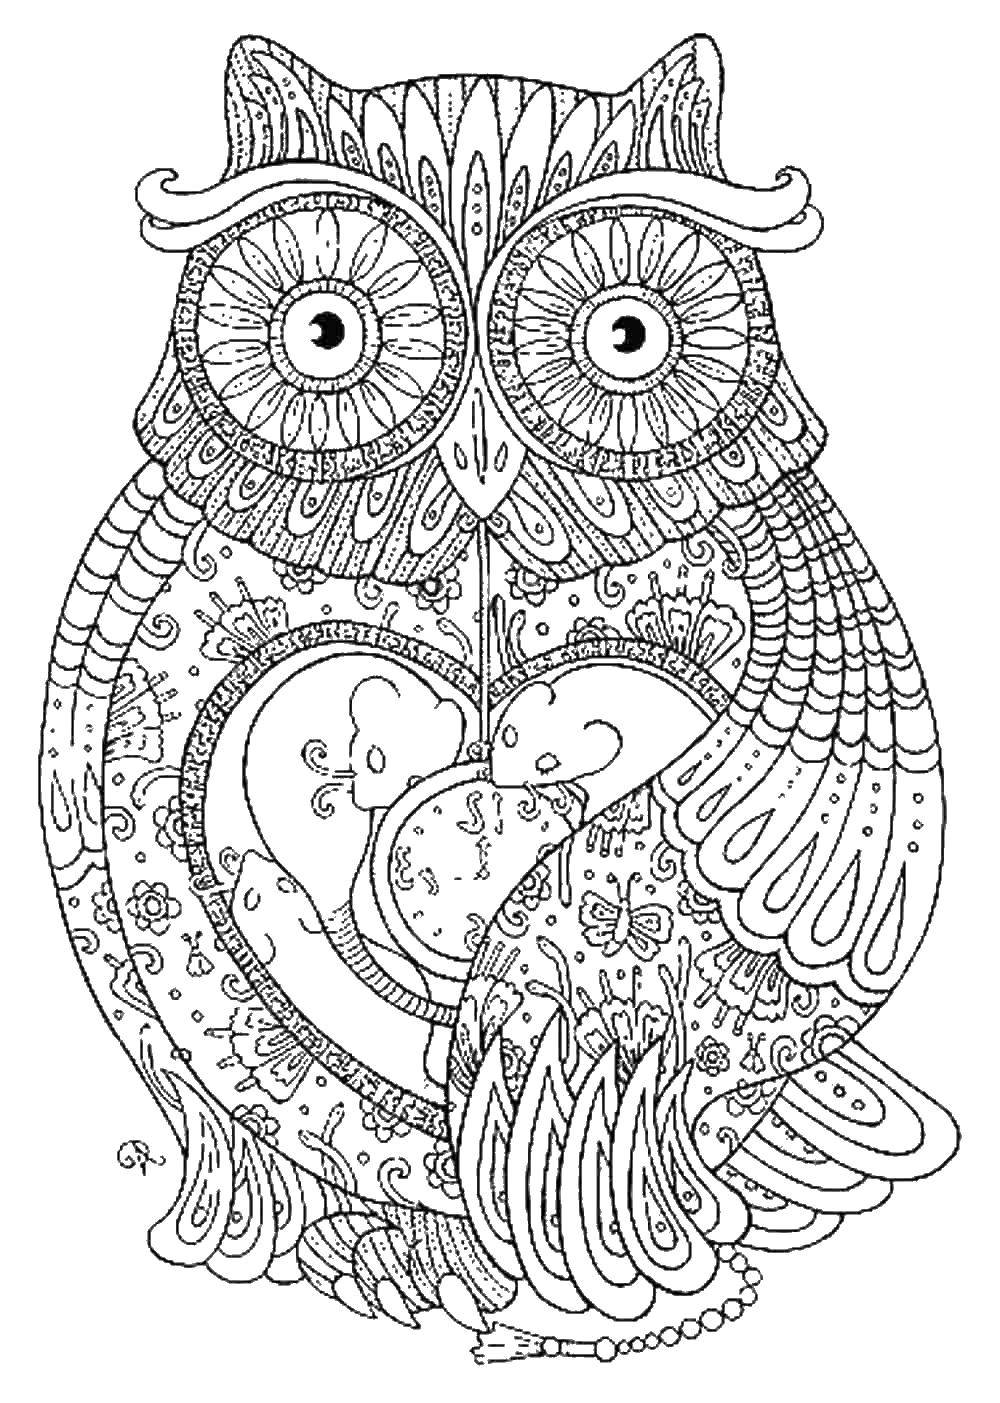 Coloring Owl. Category coloring antistress. Tags:  owl.